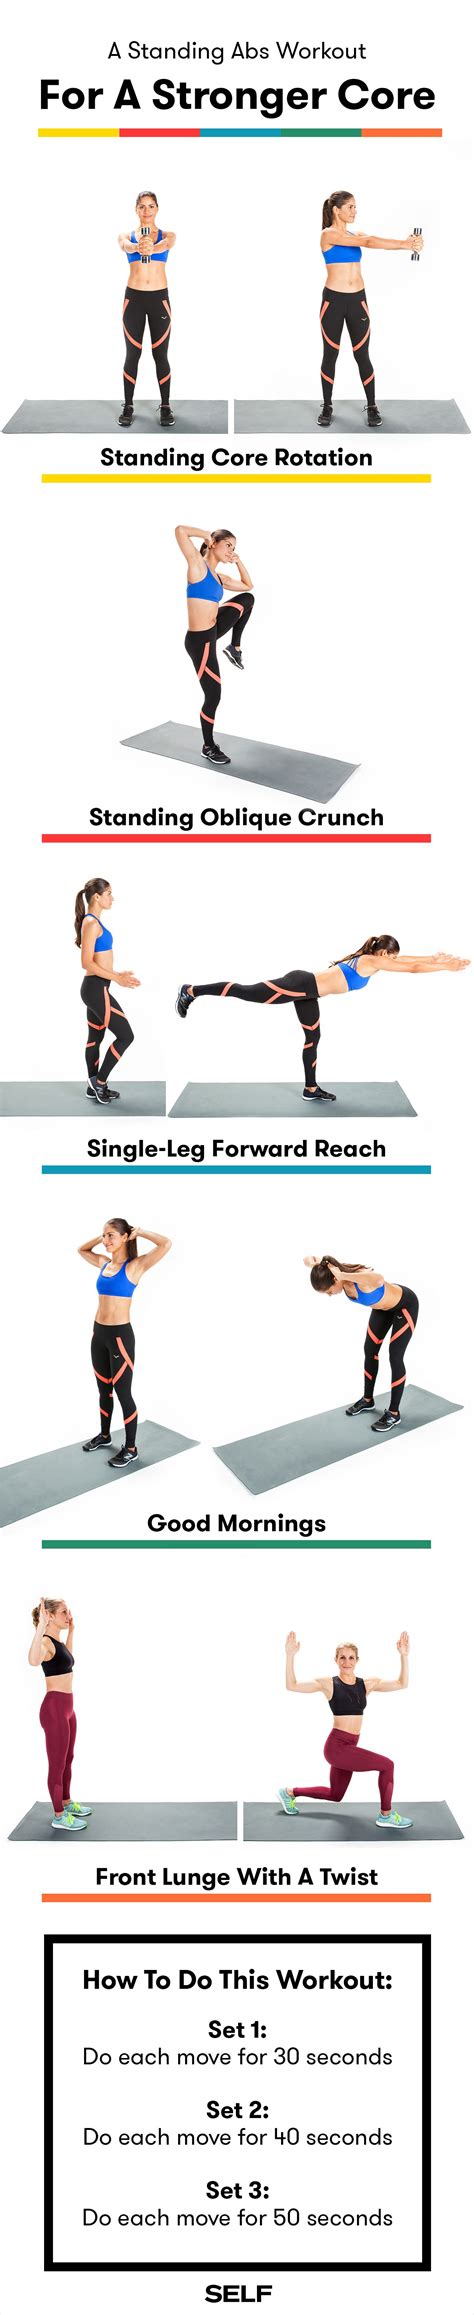 standing abs workout   strong firm core